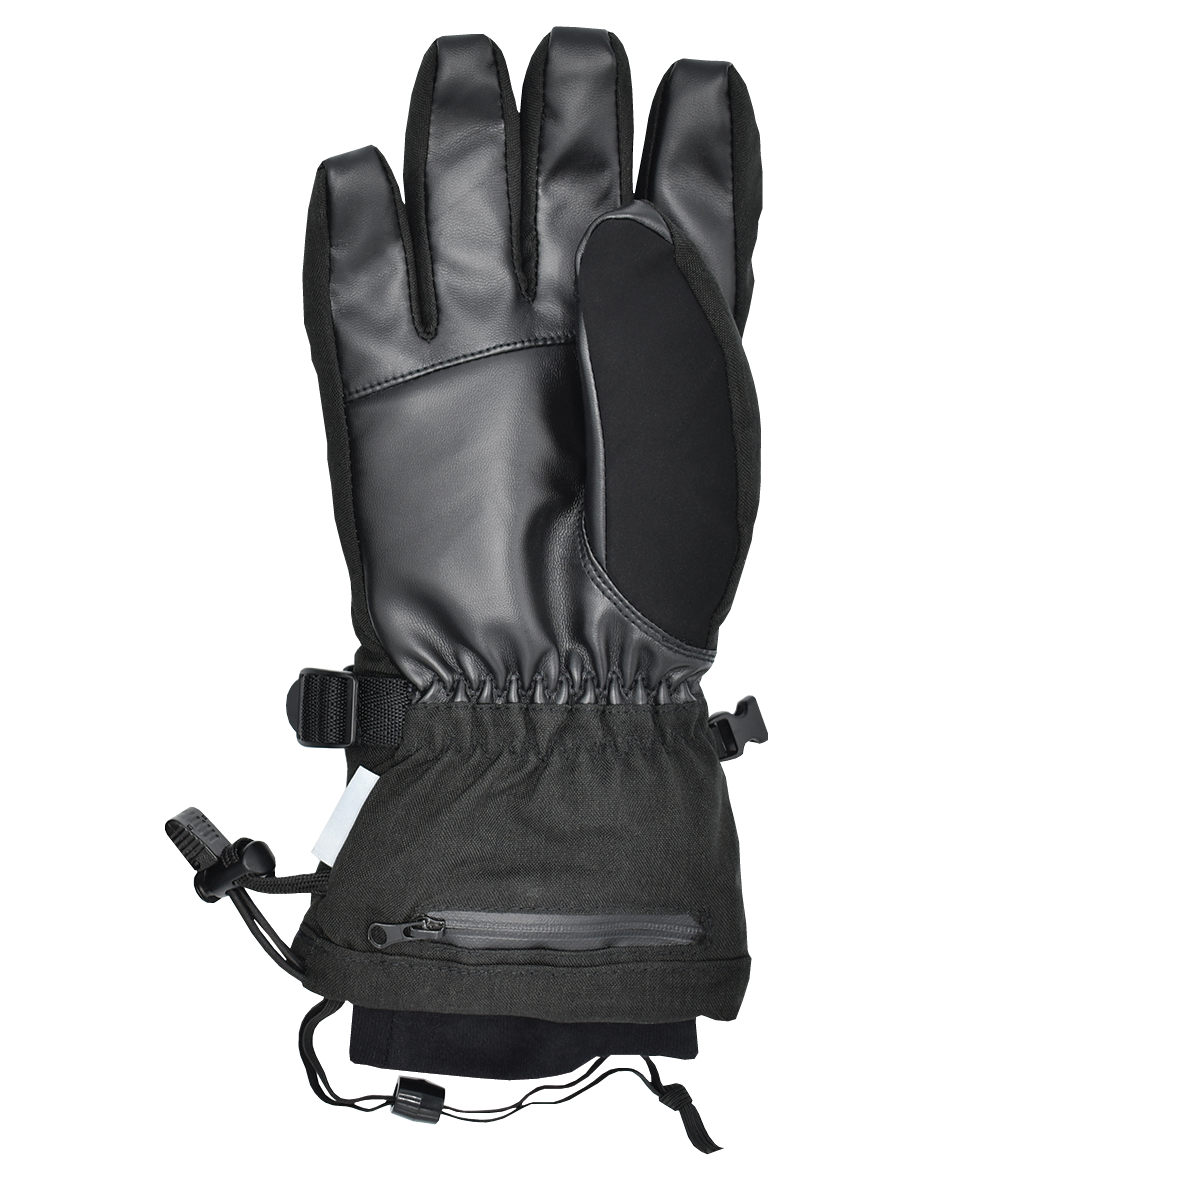 the torch electrek heated revolt gloves have an innovative design with waterproof ykk zippers that hold the battery under the wrist for the most ergonomic position for mobility and comfort